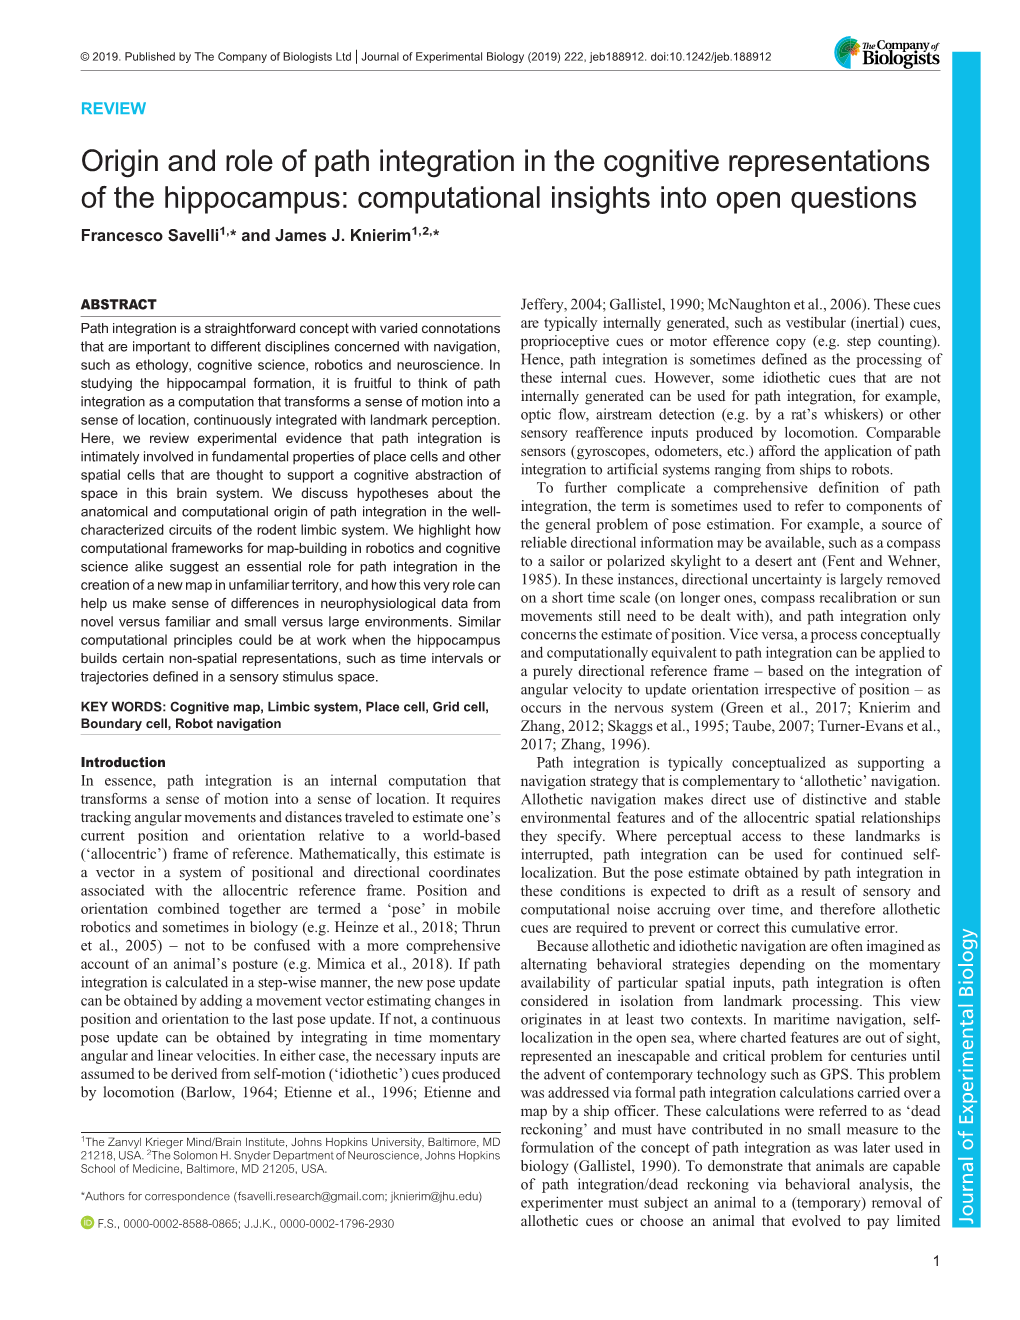 Origin and Role of Path Integration in the Cognitive Representations of the Hippocampus: Computational Insights Into Open Questions Francesco Savelli1,* and James J